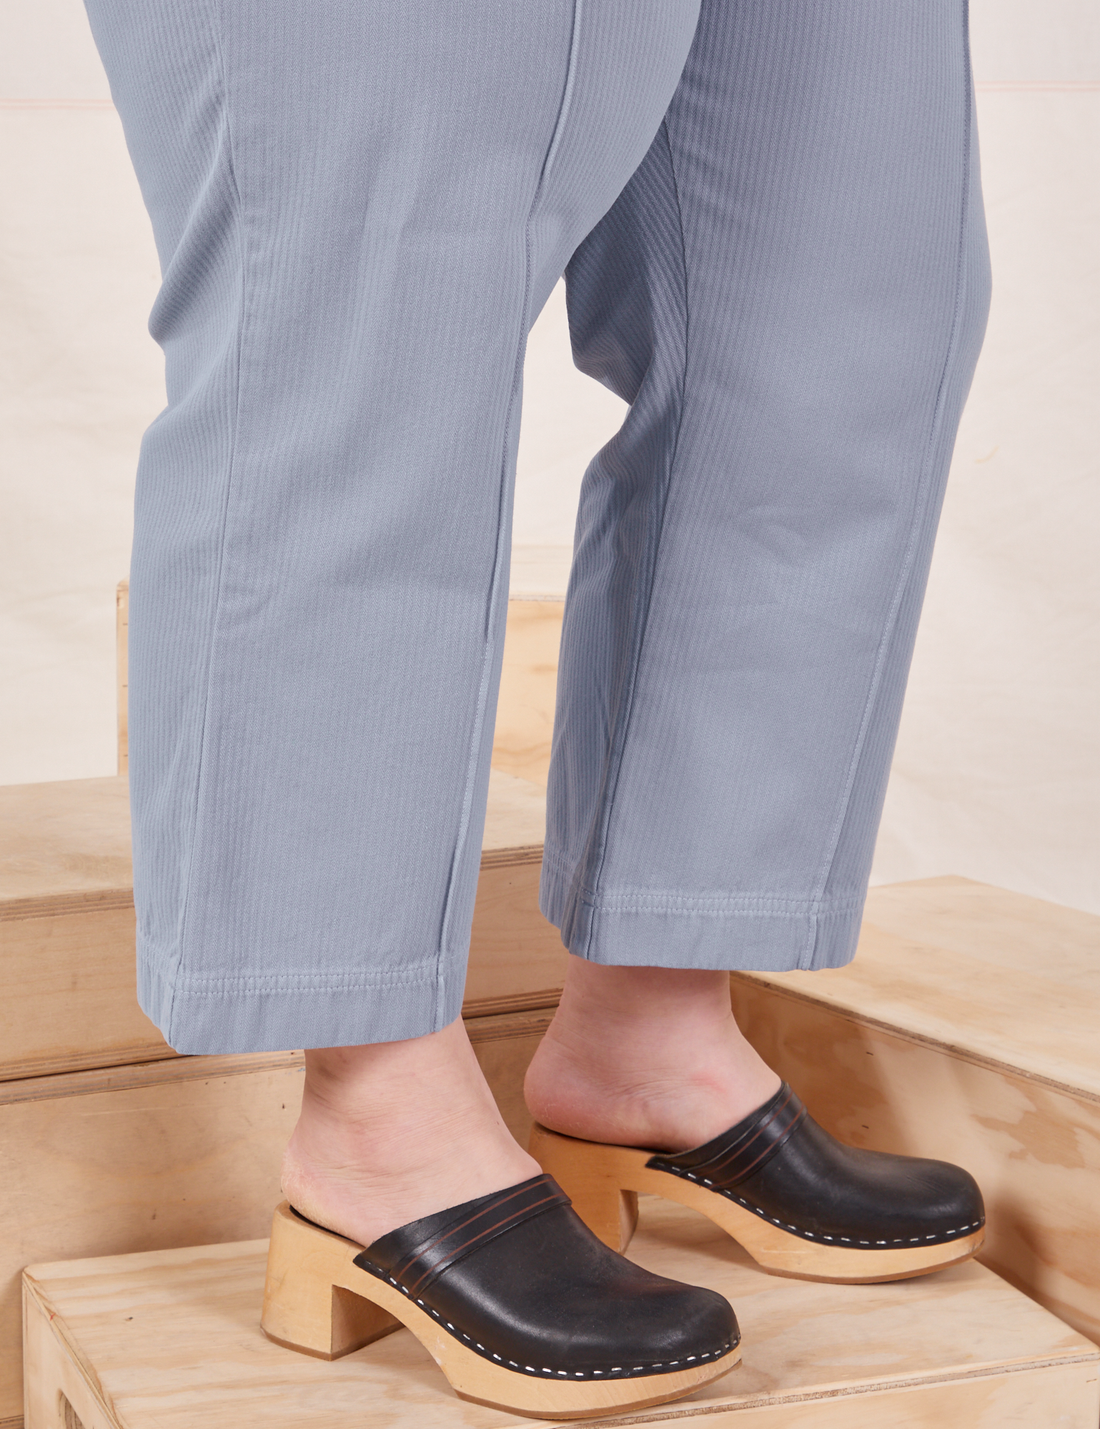 Heritage Westerns in Periwinkle pant leg side view on Ashley